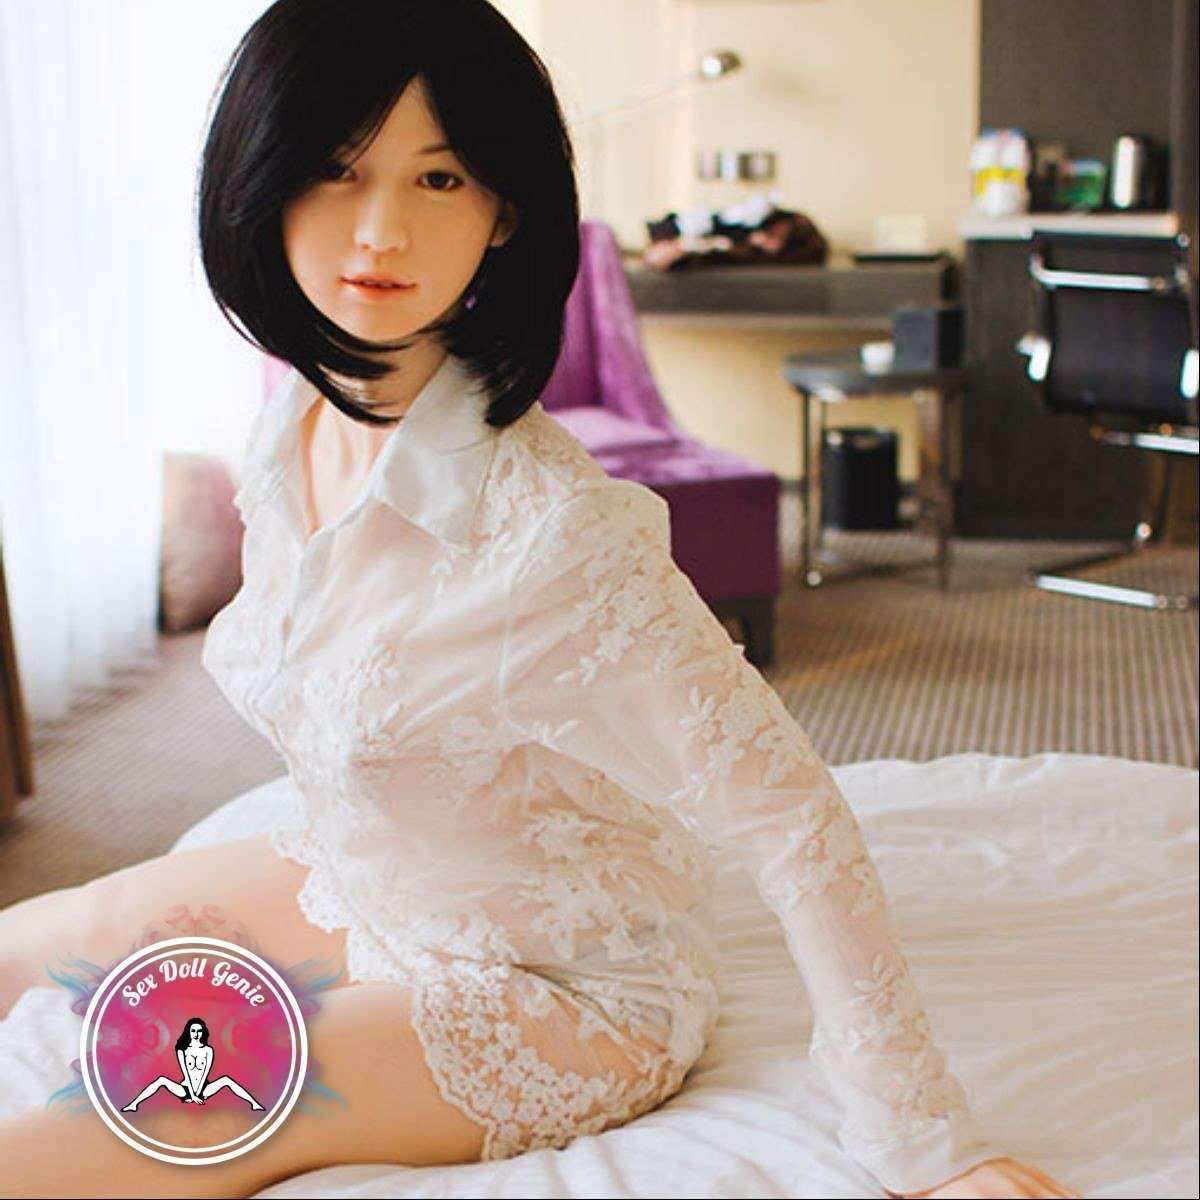 DS Doll - 158Plus - Nanase Head - Type 1 D Cup Silicone Doll-24